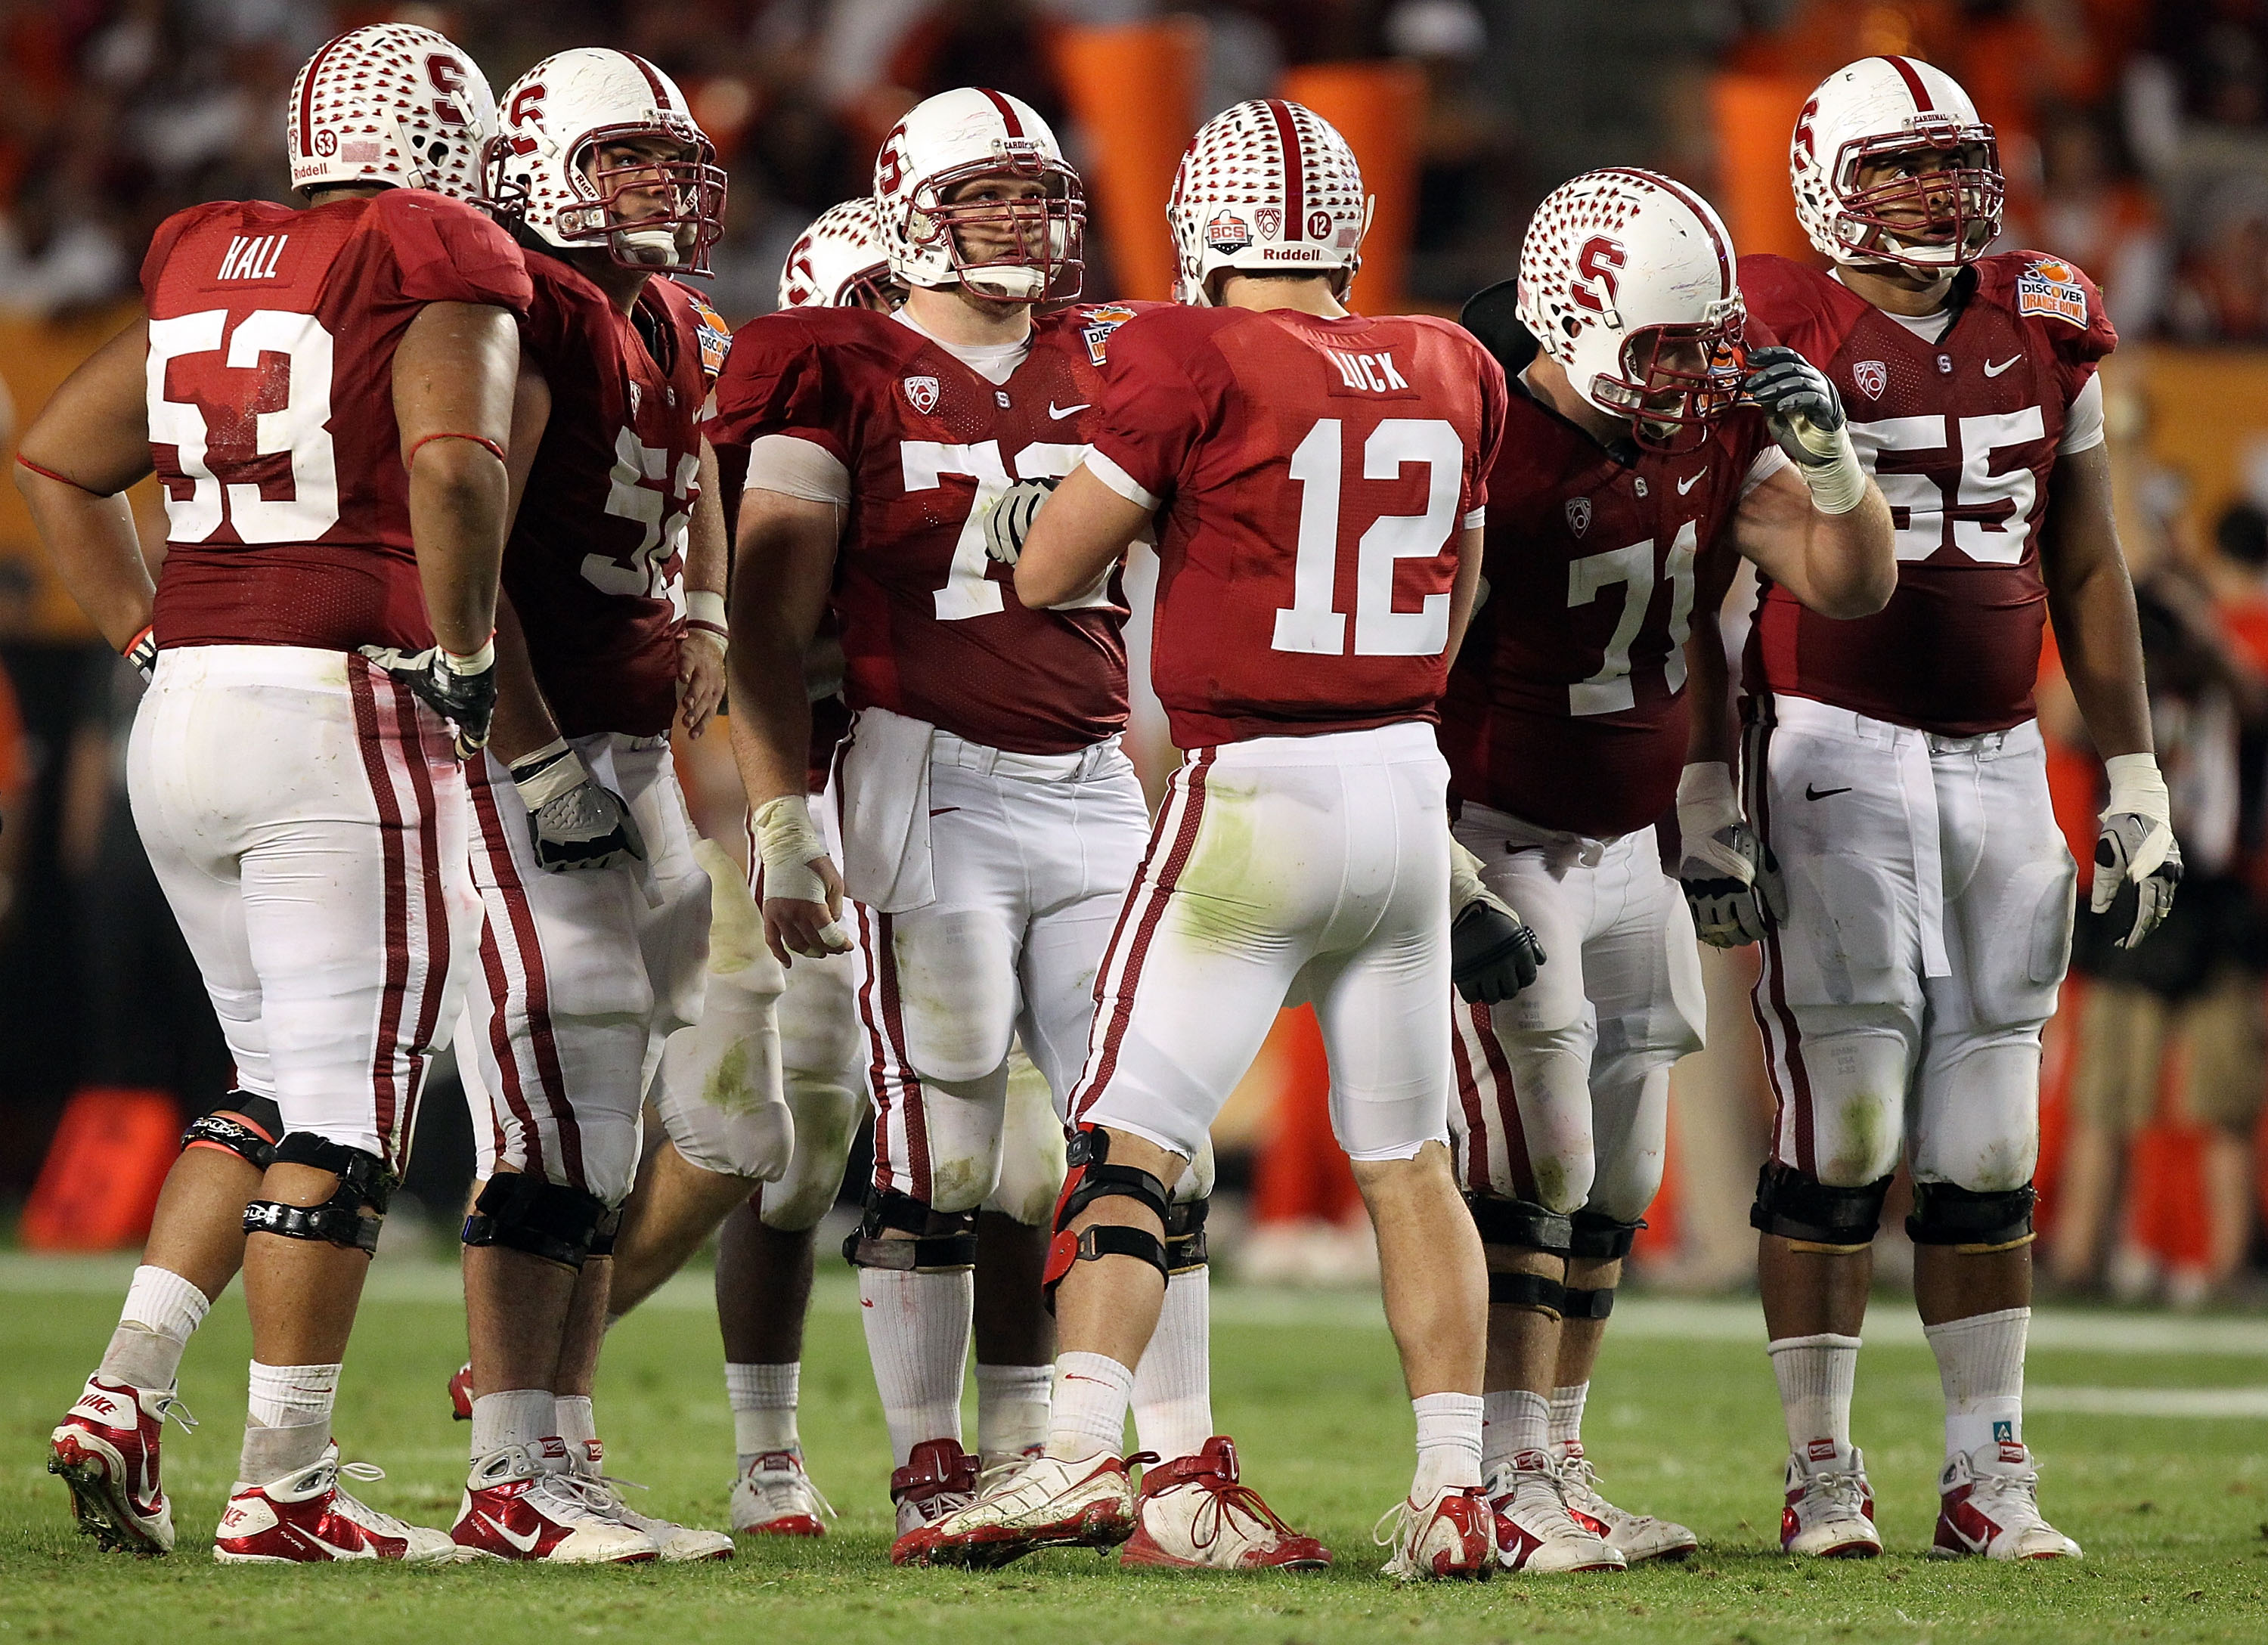 MIAMI, FL - JANUARY 03: Quarterback Andrew Luck #12 of the Stanford Cardinal calls a play in the huddle as Derek Hall #53, David DeCastro #52, Chase Beeler #72, Andrew Phillips #71 and Jonathan Martin #55 listen to the call against the Virginia Tech Hokie